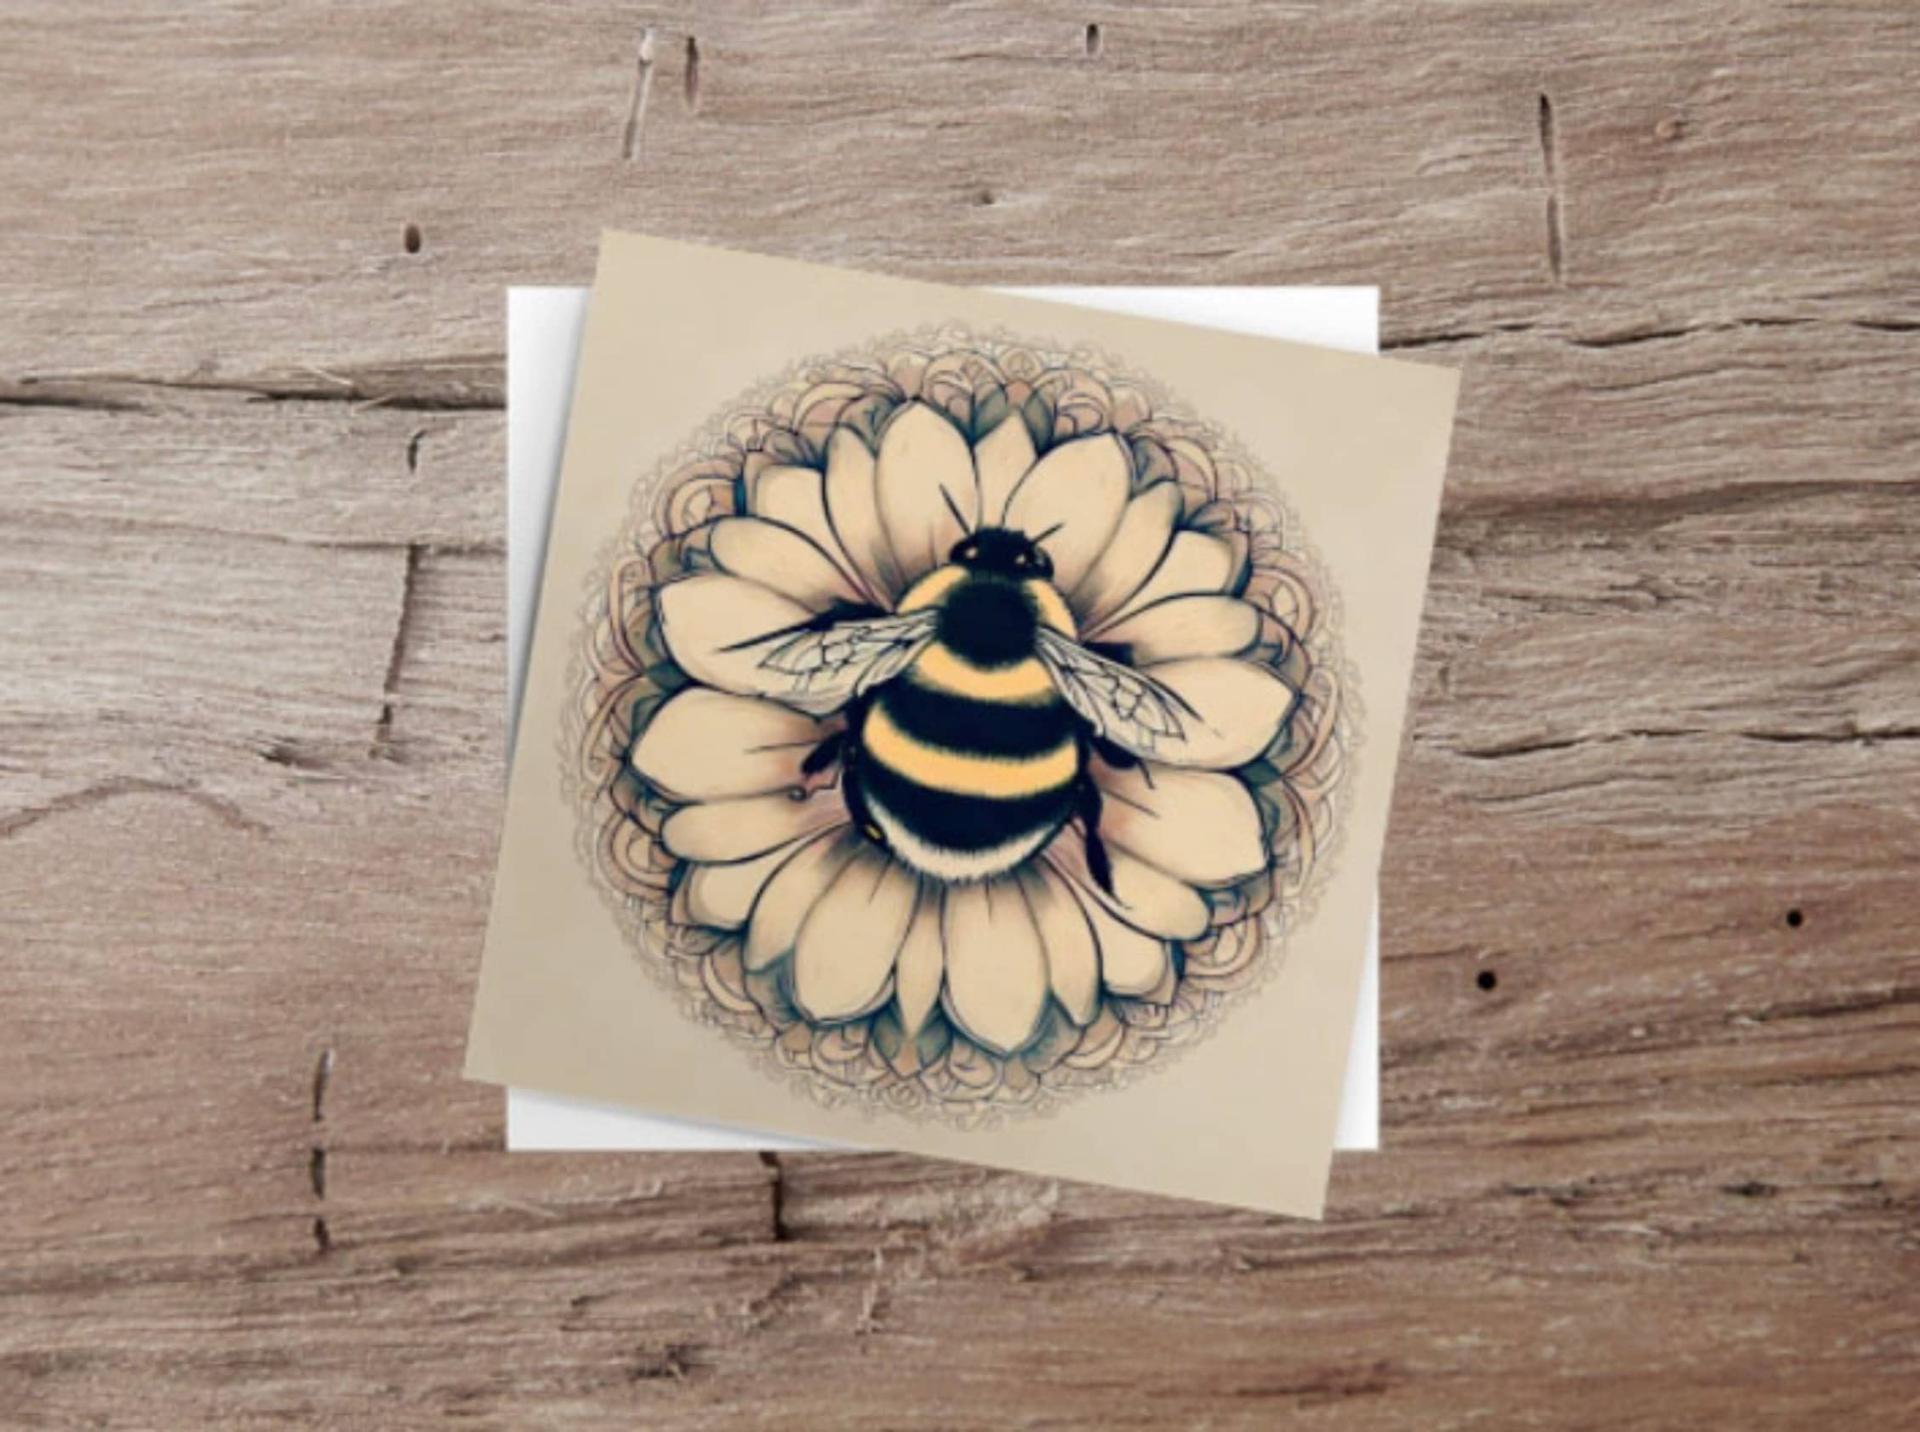 Bumble Bee Greeting Cards, Set of 5 Designs, Bulk Pack of Cards